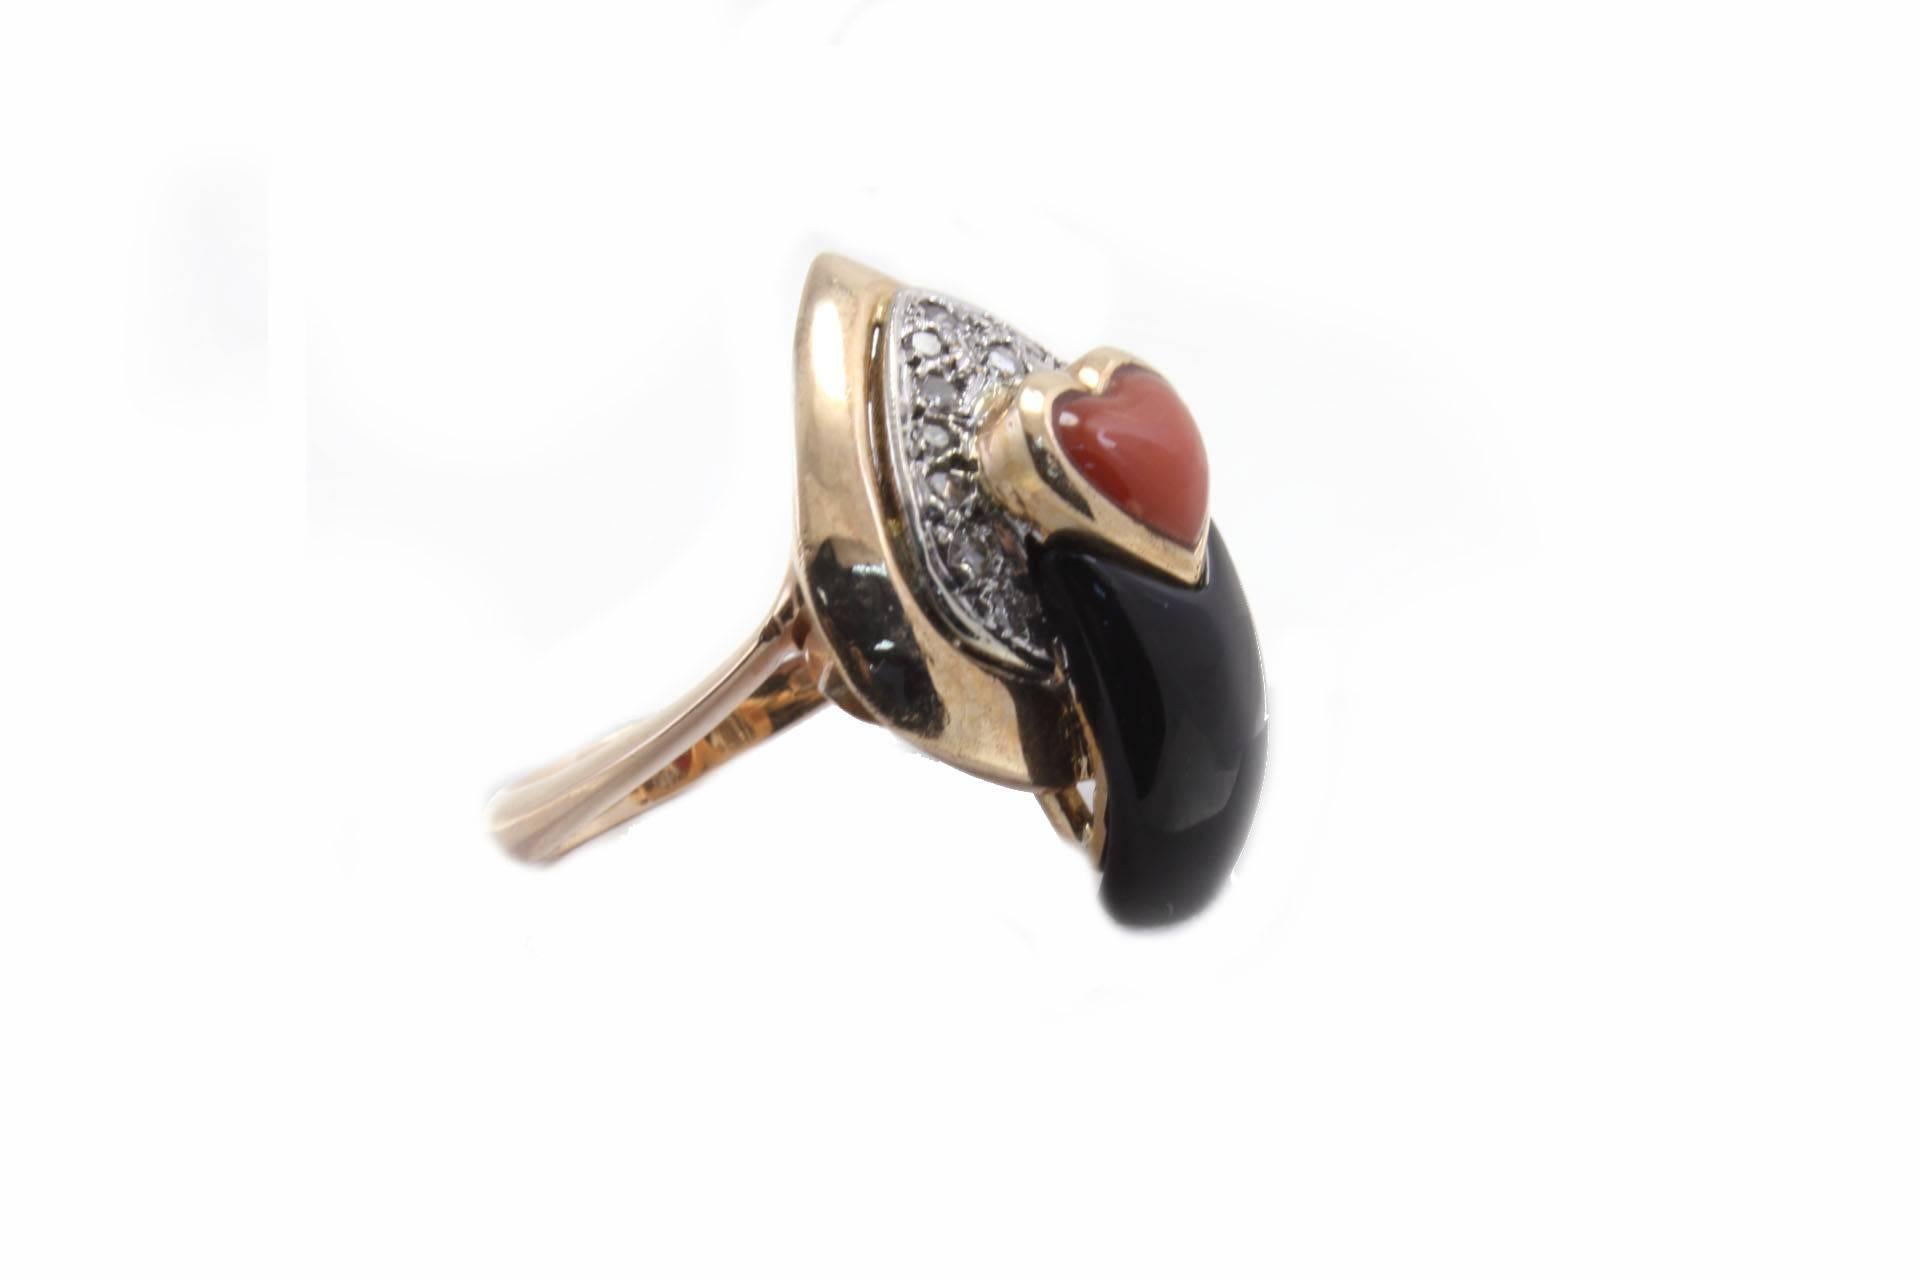 A shiny heart shaped coral surrounded of a spade shape diamond and onyx, all mounted in 14Kt yellow gold.
Ring Size: US 7.5 - ITA 16 - French 56 - UK P

Tot weight 10gr
Diamonds 0.26 Kt
Coral 0.15 gr
Onyx 0.75 gr

Rf.guca